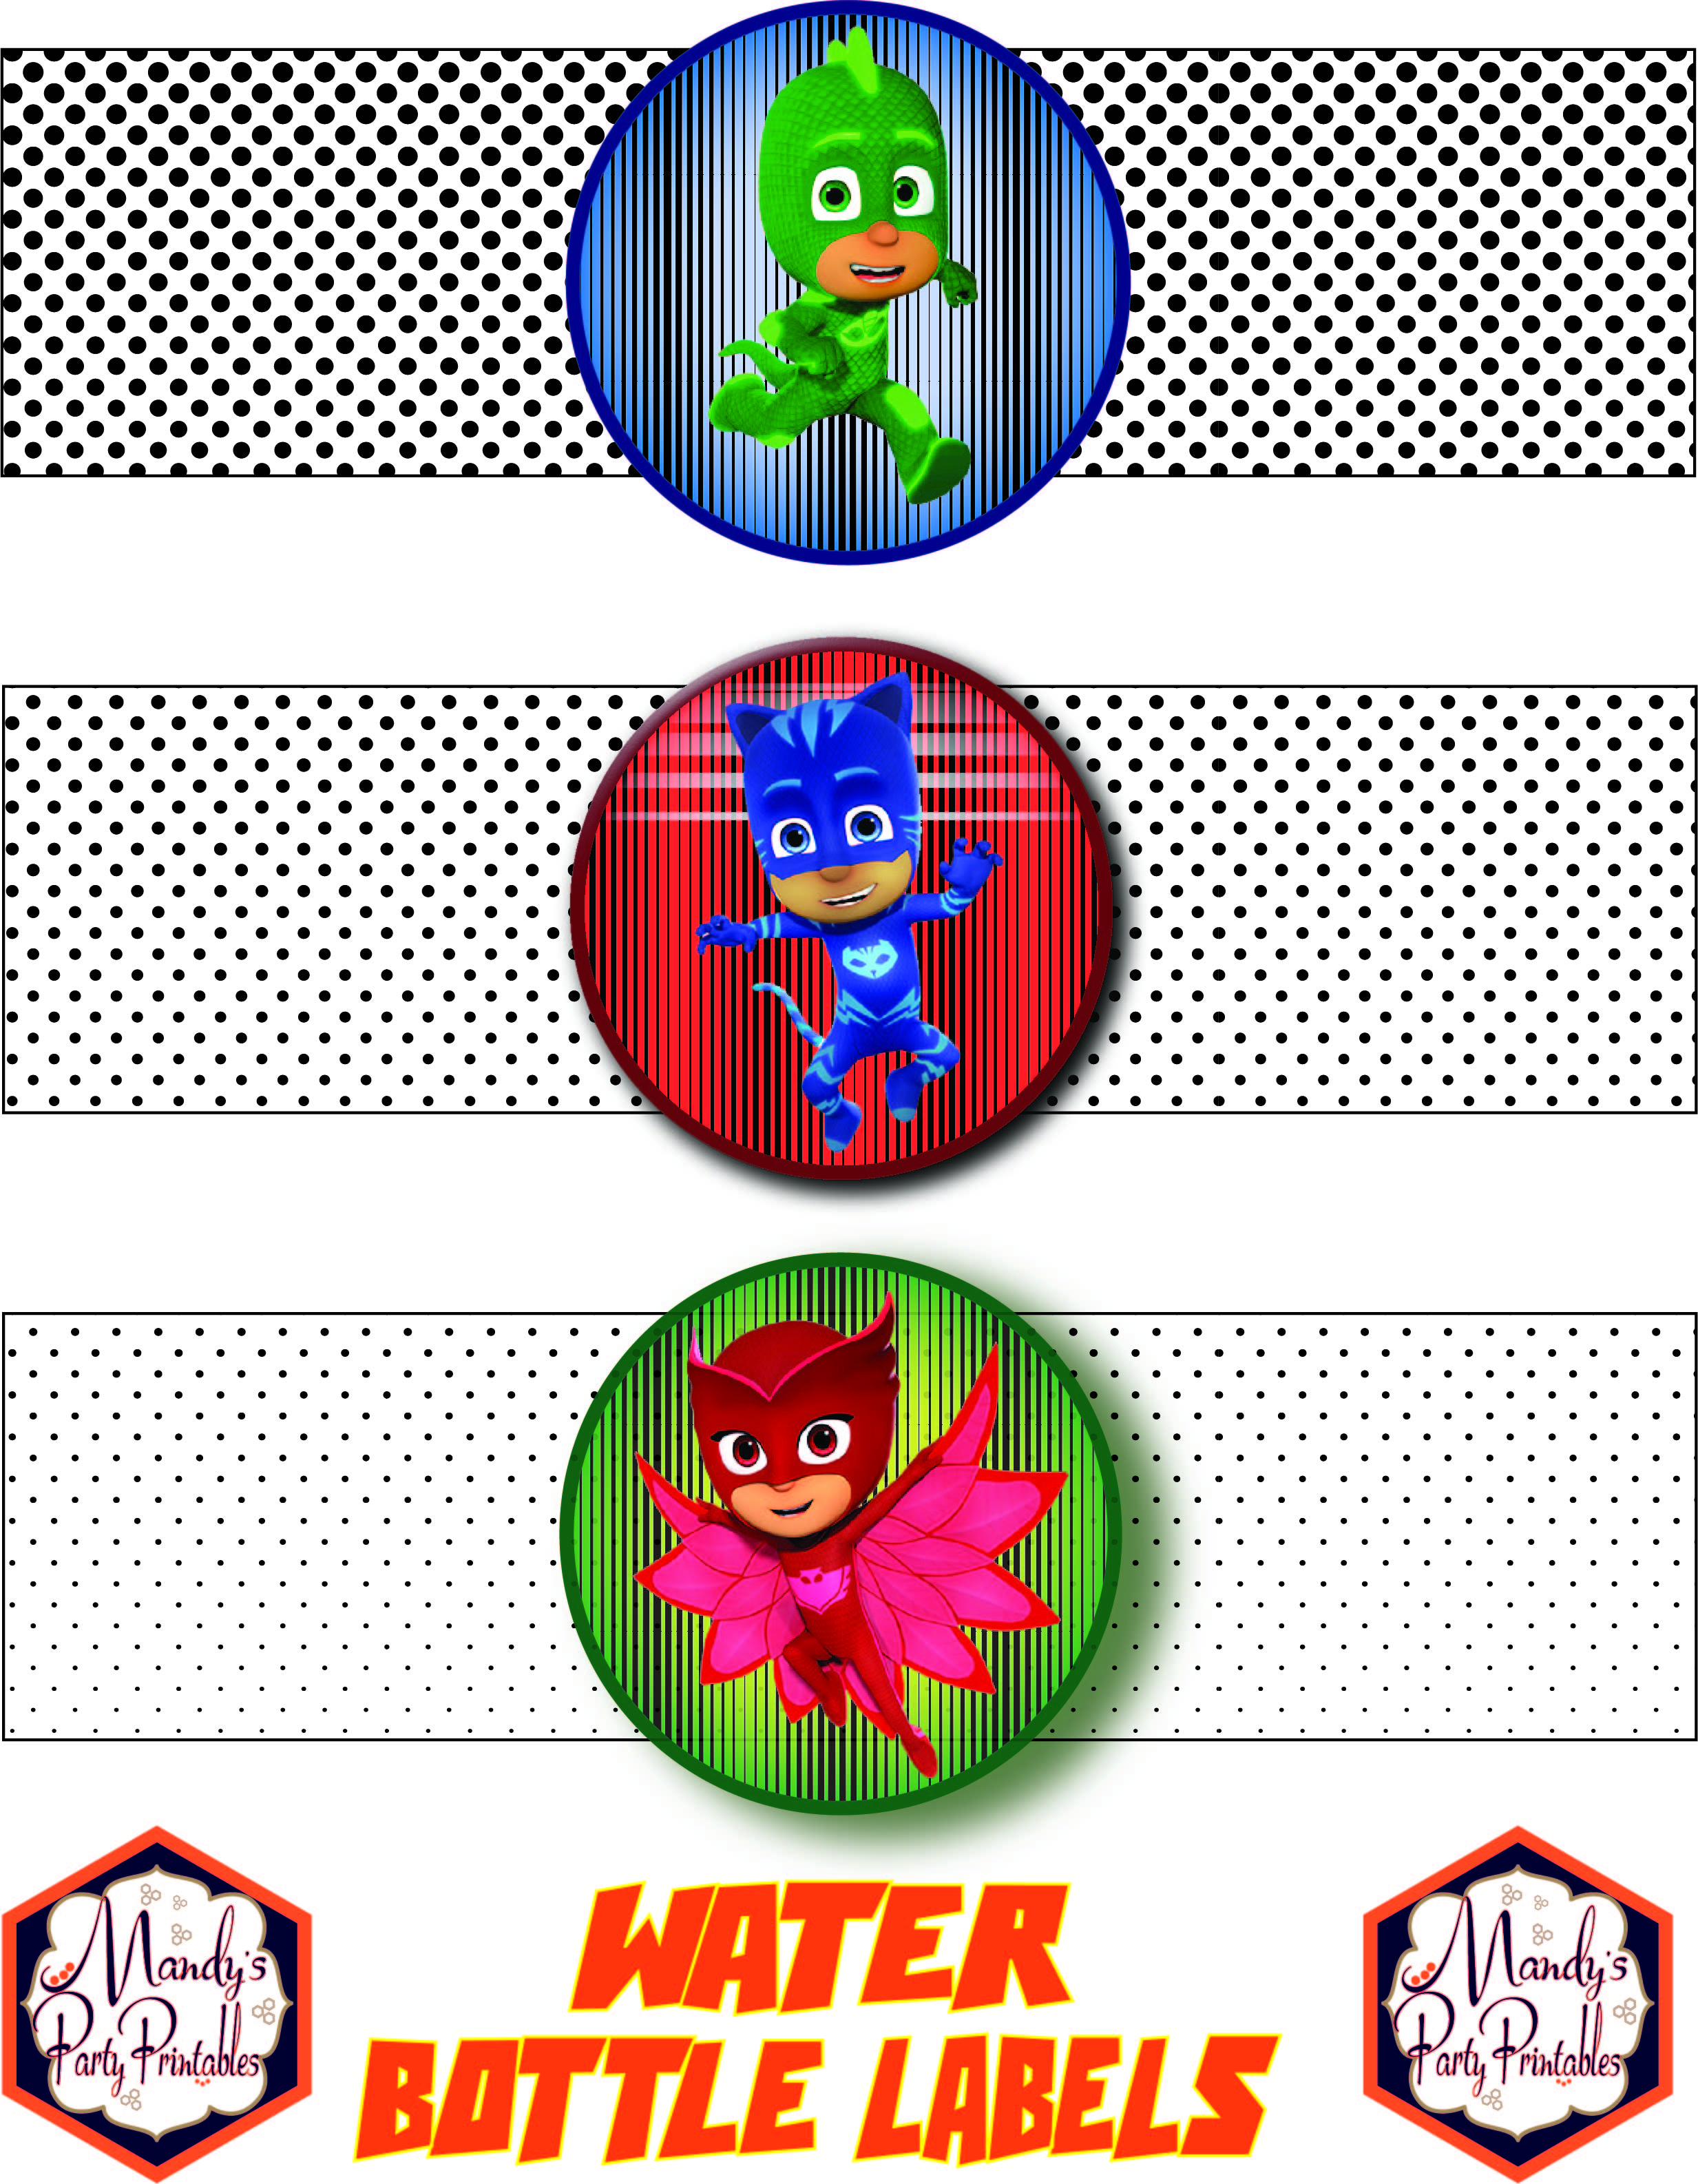 Water bottle labels from Free PJ Masks Birthday Party Printables via Mandy's Party Printables